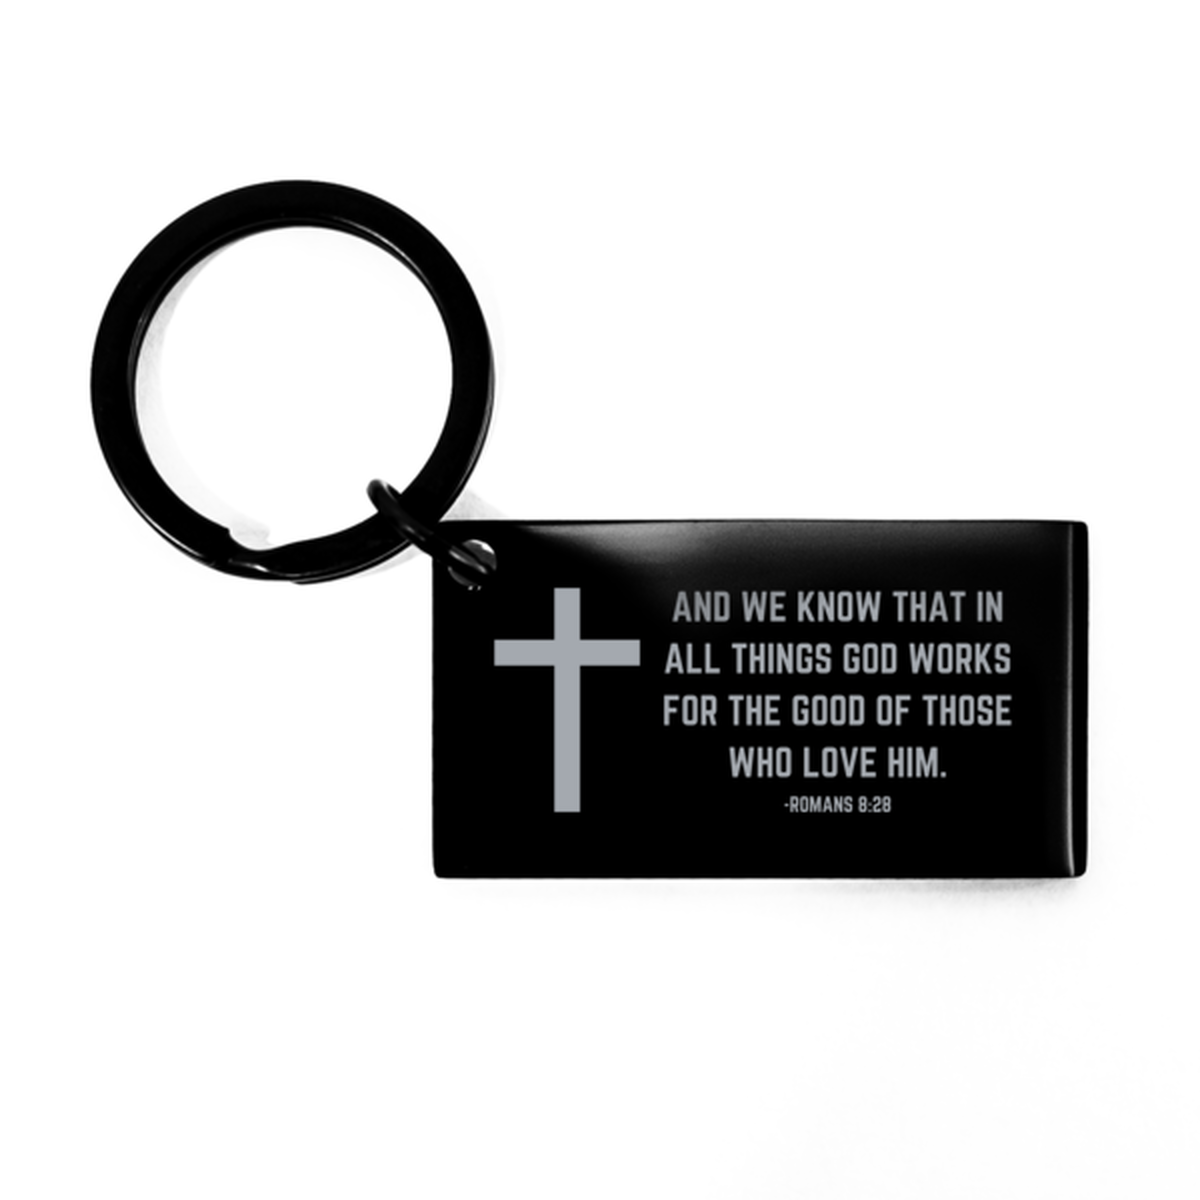 Baptism Gifts For Teenage Boys Girls, Christian Bible Verse Black Keychain, And we know that in all things, Confirmation Gifts, Bible Verse Keyring for Son, Godson, Grandson, Nephew